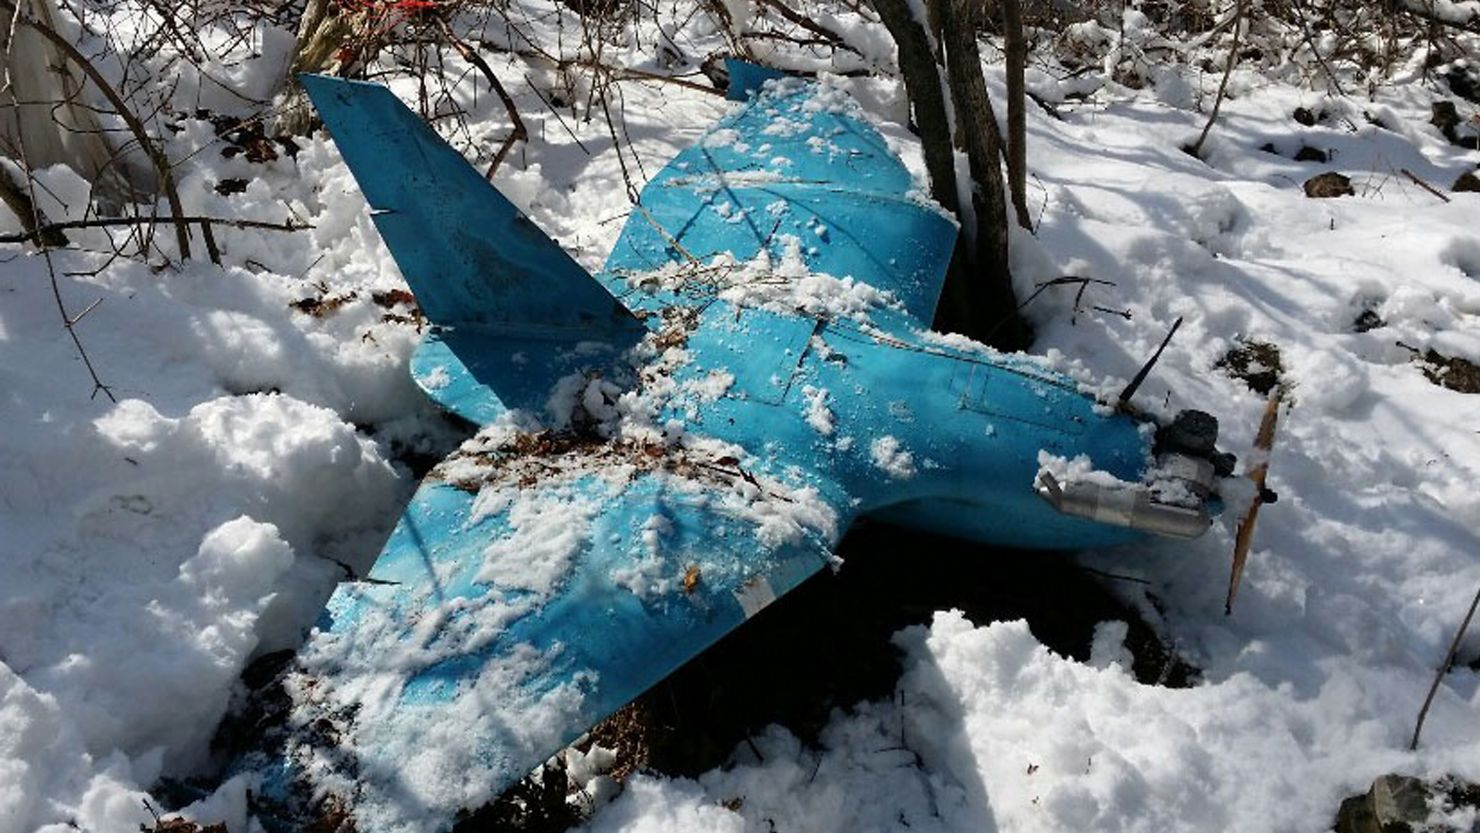 The wreckage of a crashed unmanned aerial vehicle on a mountain in Samcheok, South Korea on April 6, 2014.